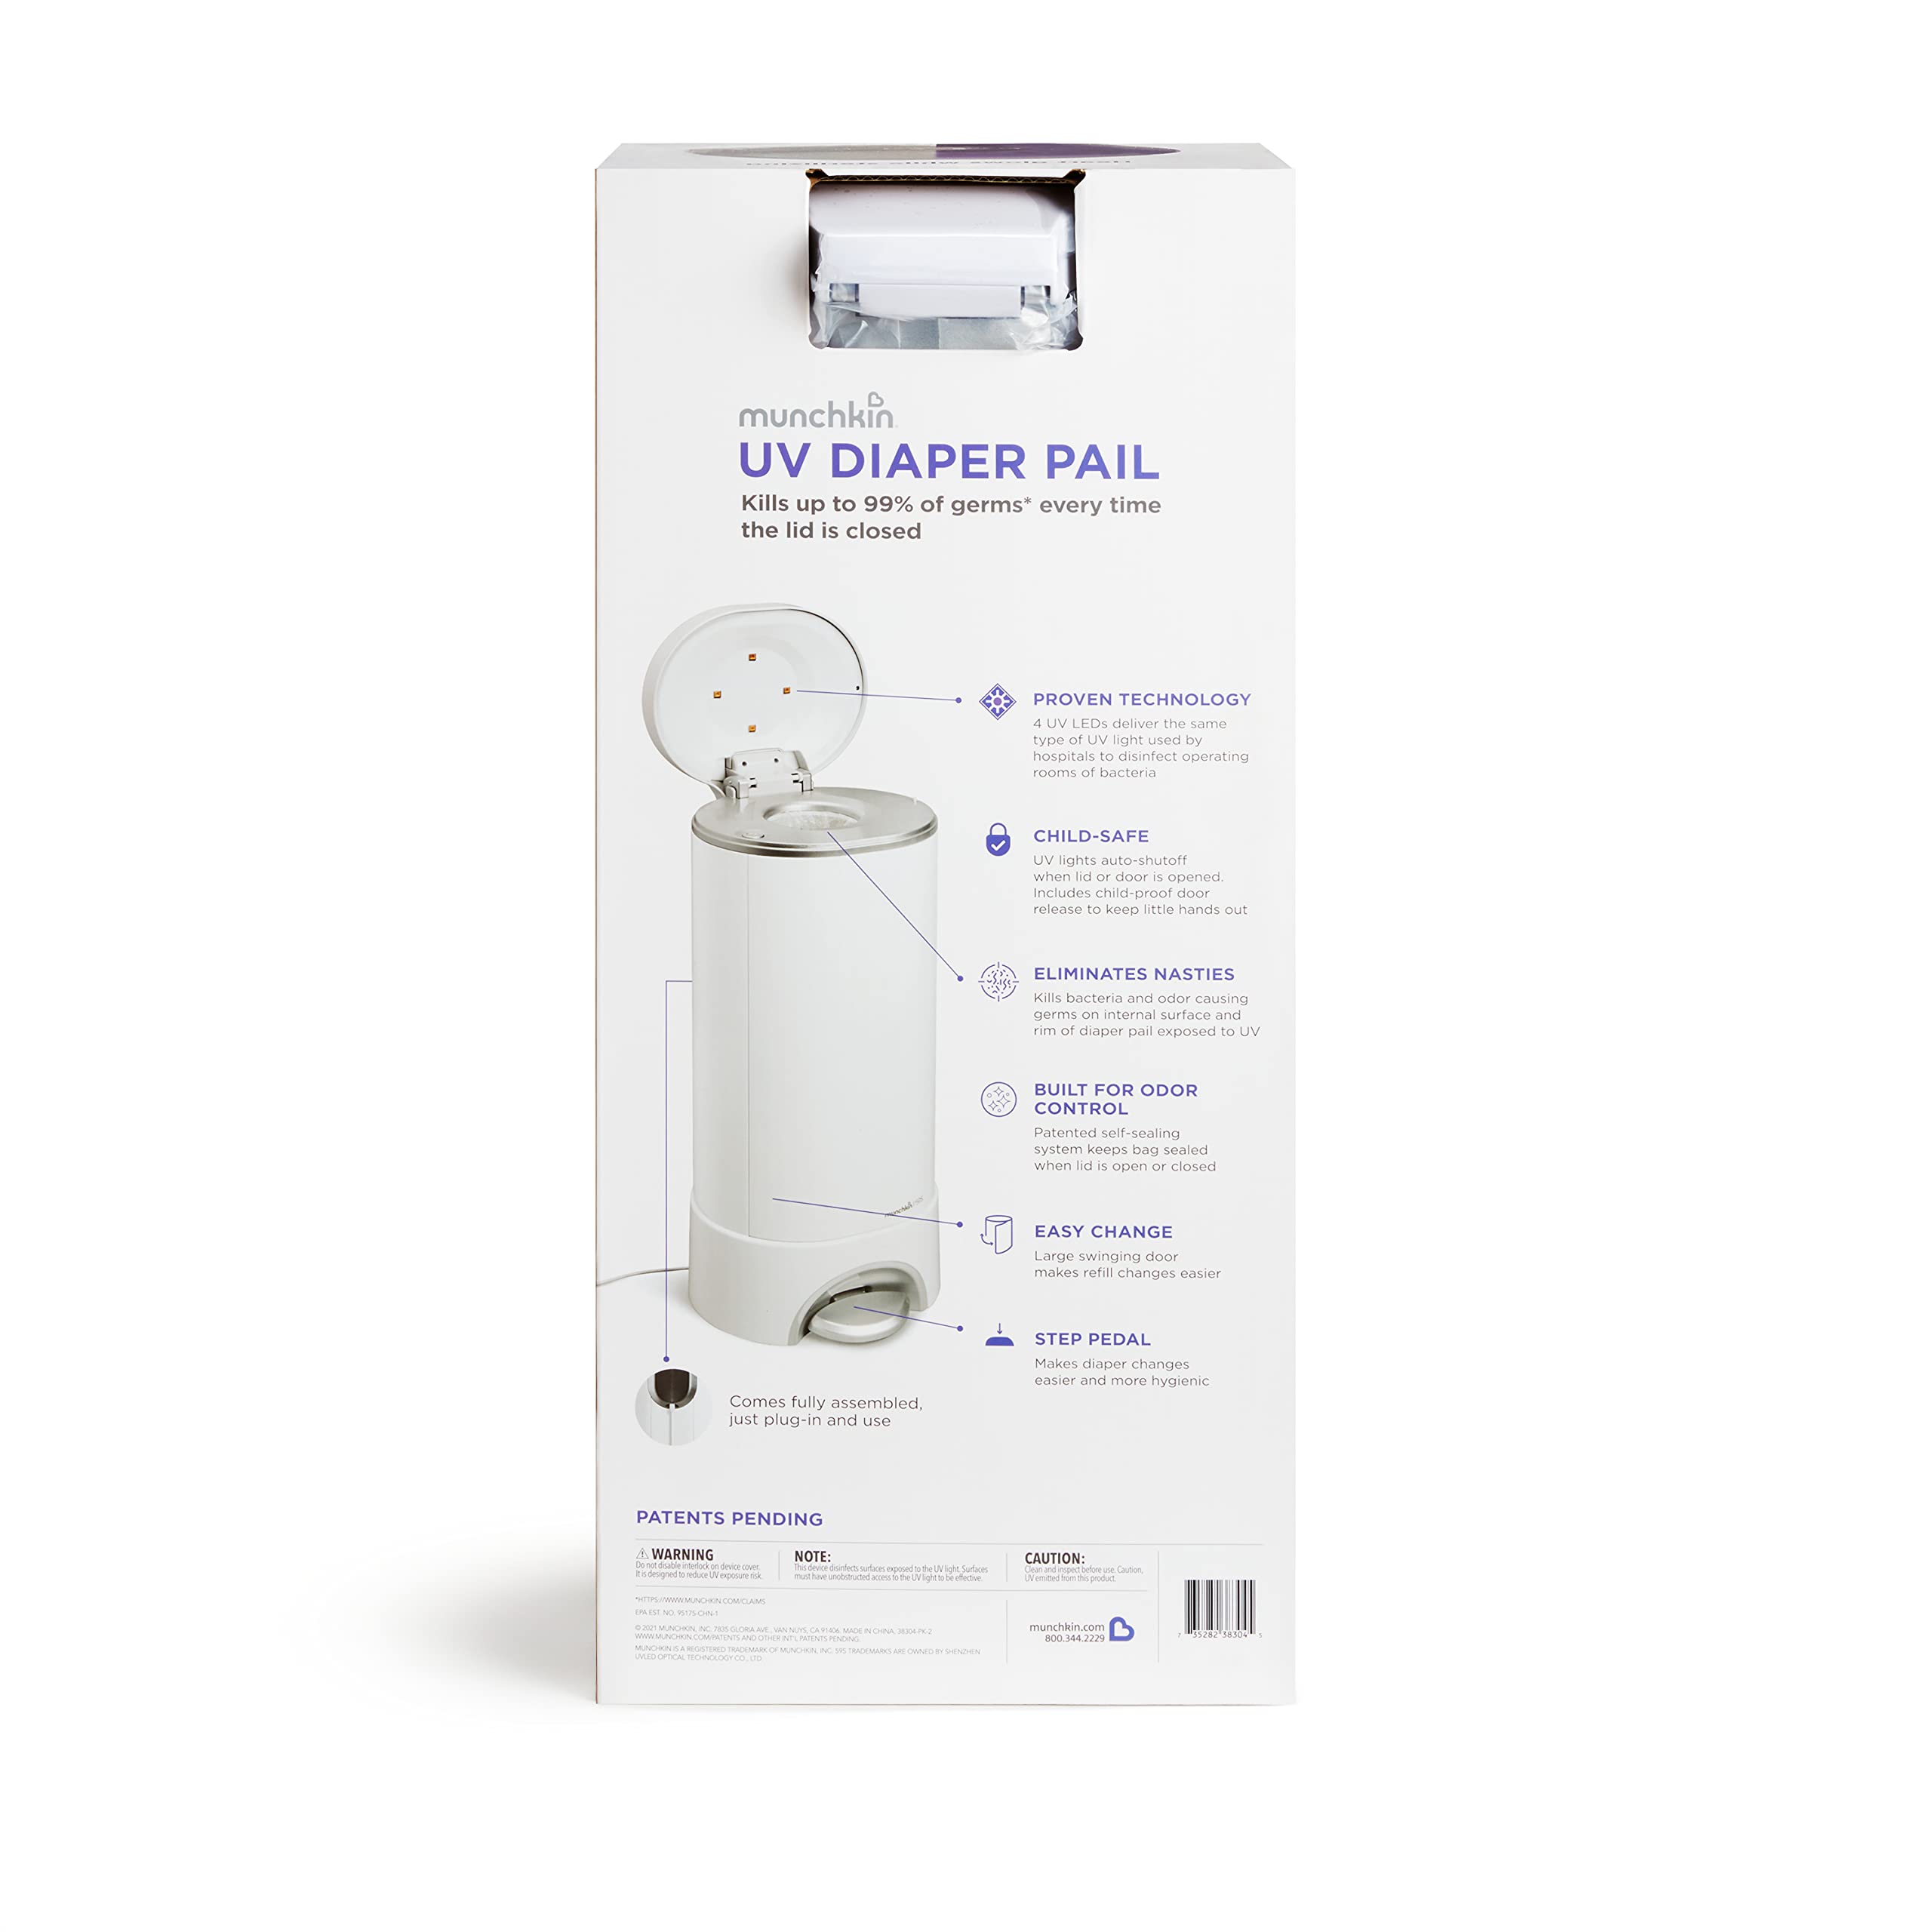 Munchkin® UV Diaper Pail #1 in Odor Control, LED UV Lights Kills 99% of Germs and Odor Causing Bacteria on Lid Surface, Includes 1 UV Refill Ring and 1 UV Snap, Seal & Toss Bag